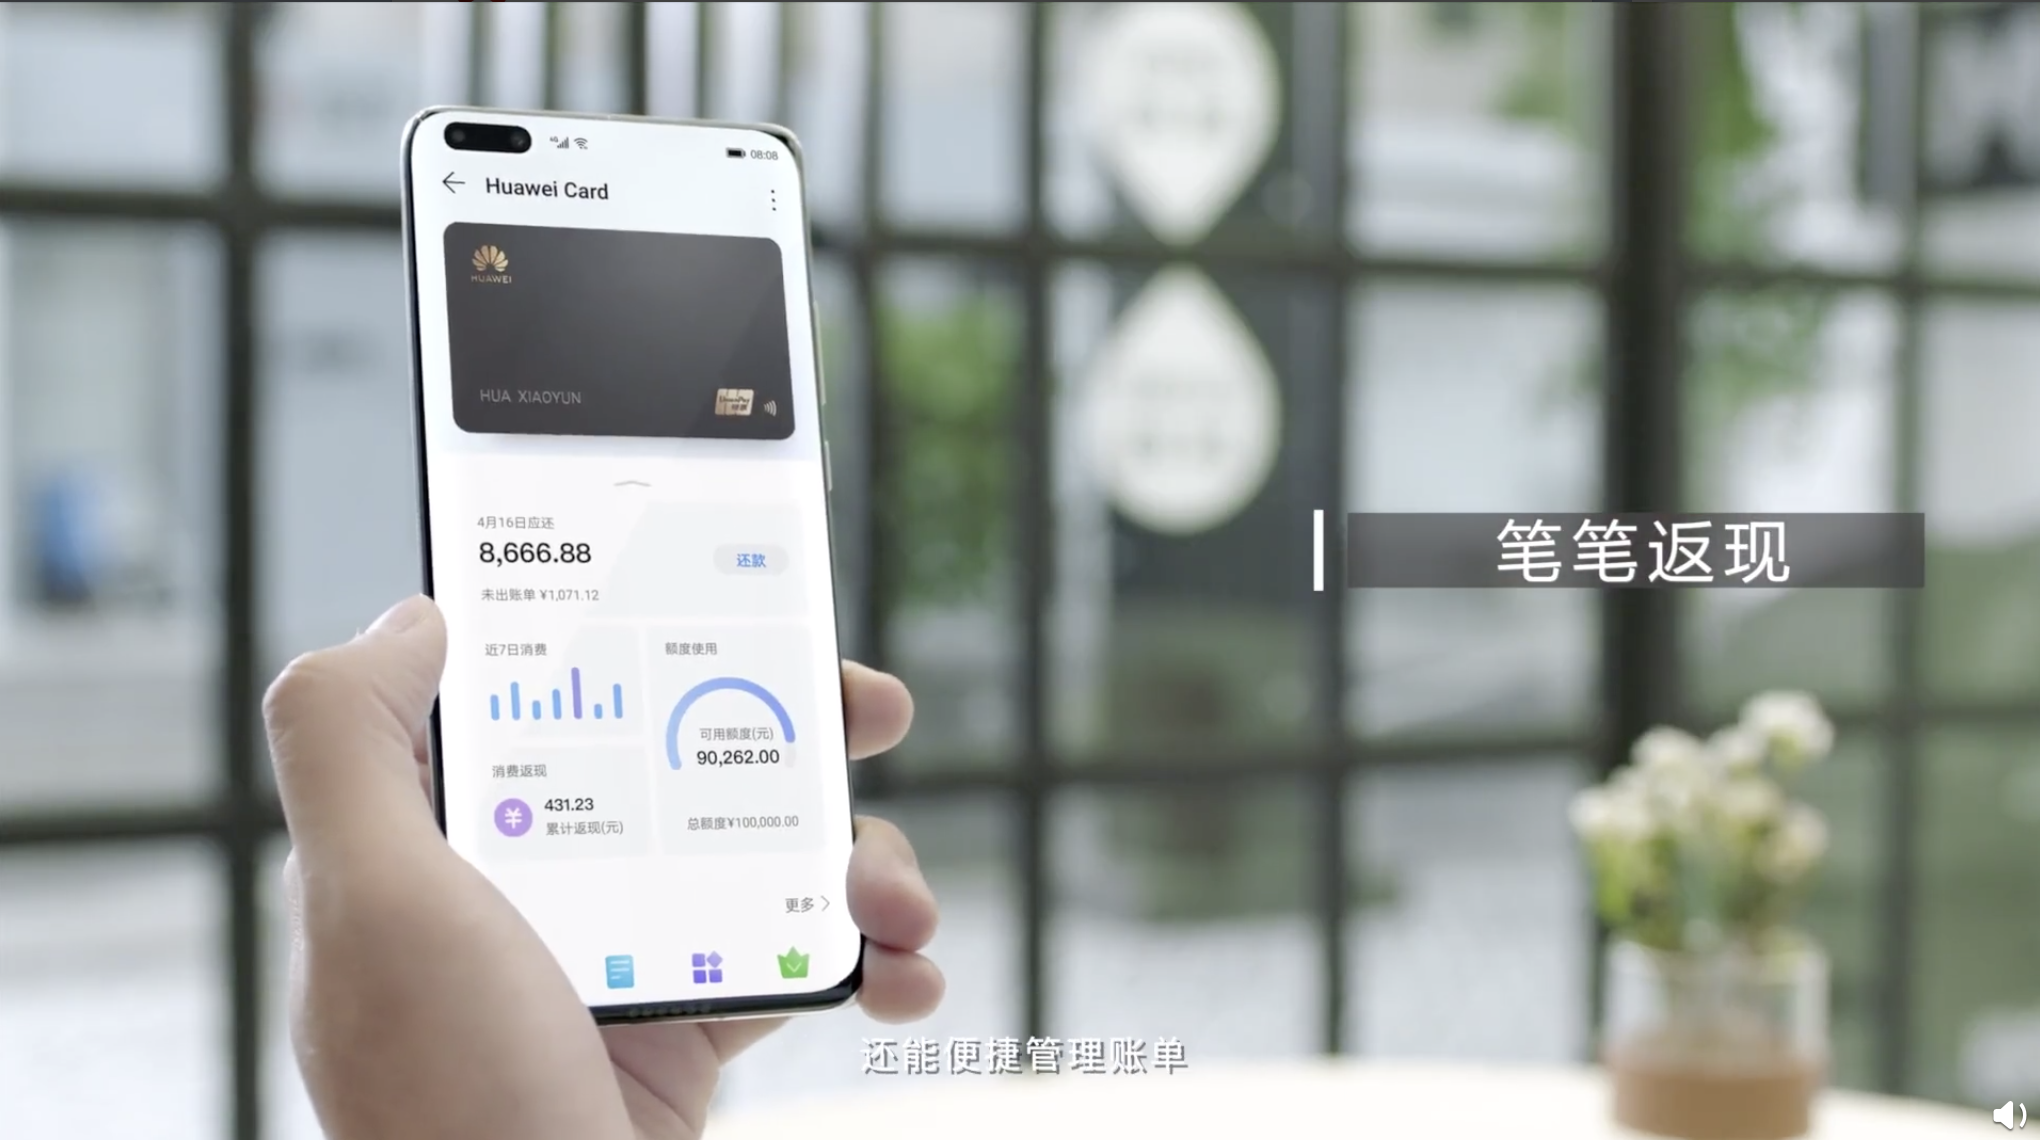 Huawei Card appears to have no card number, just like Apple Card. (Picture: Huawei)